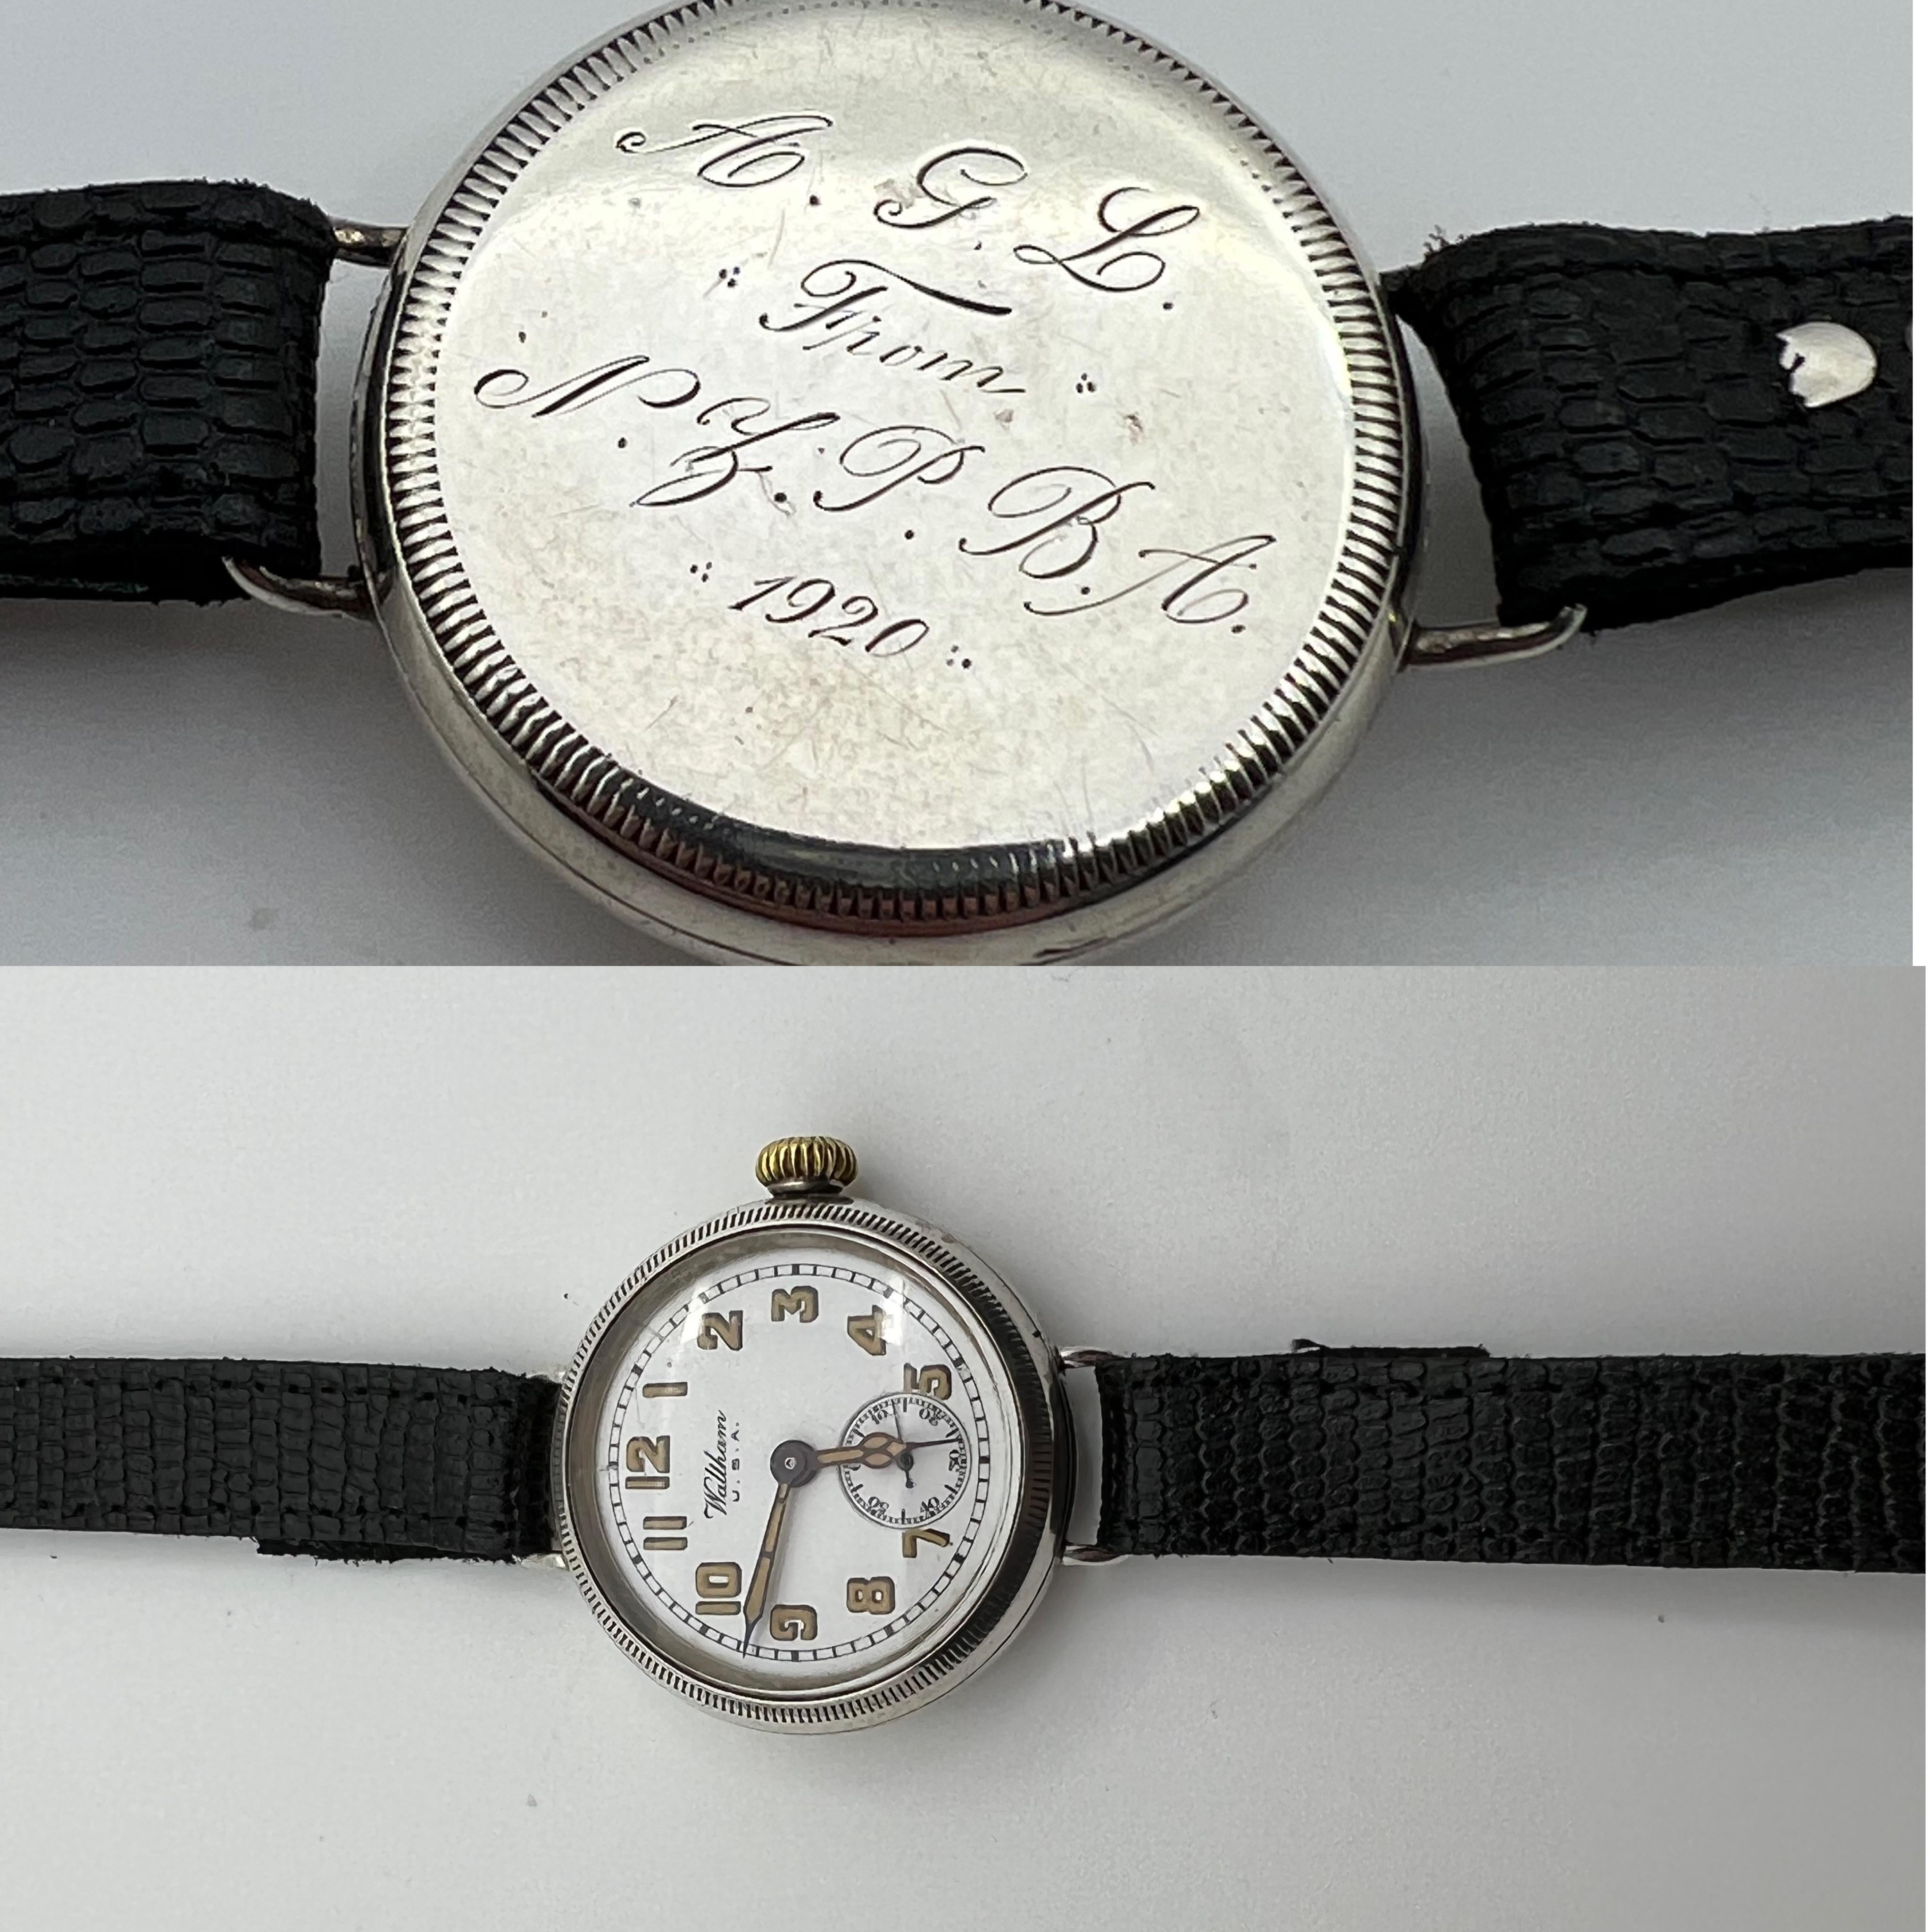 1916 English Dennison WW1, Trench Watch Solid Sterling Silver 5